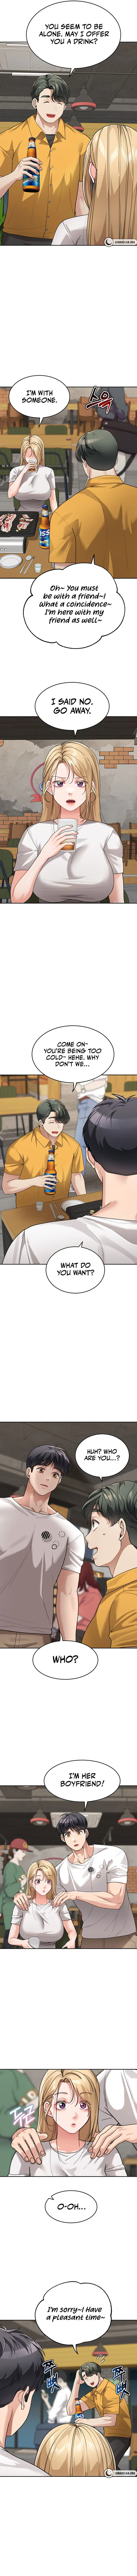 is-it-your-mother-or-sister-chap-31-6